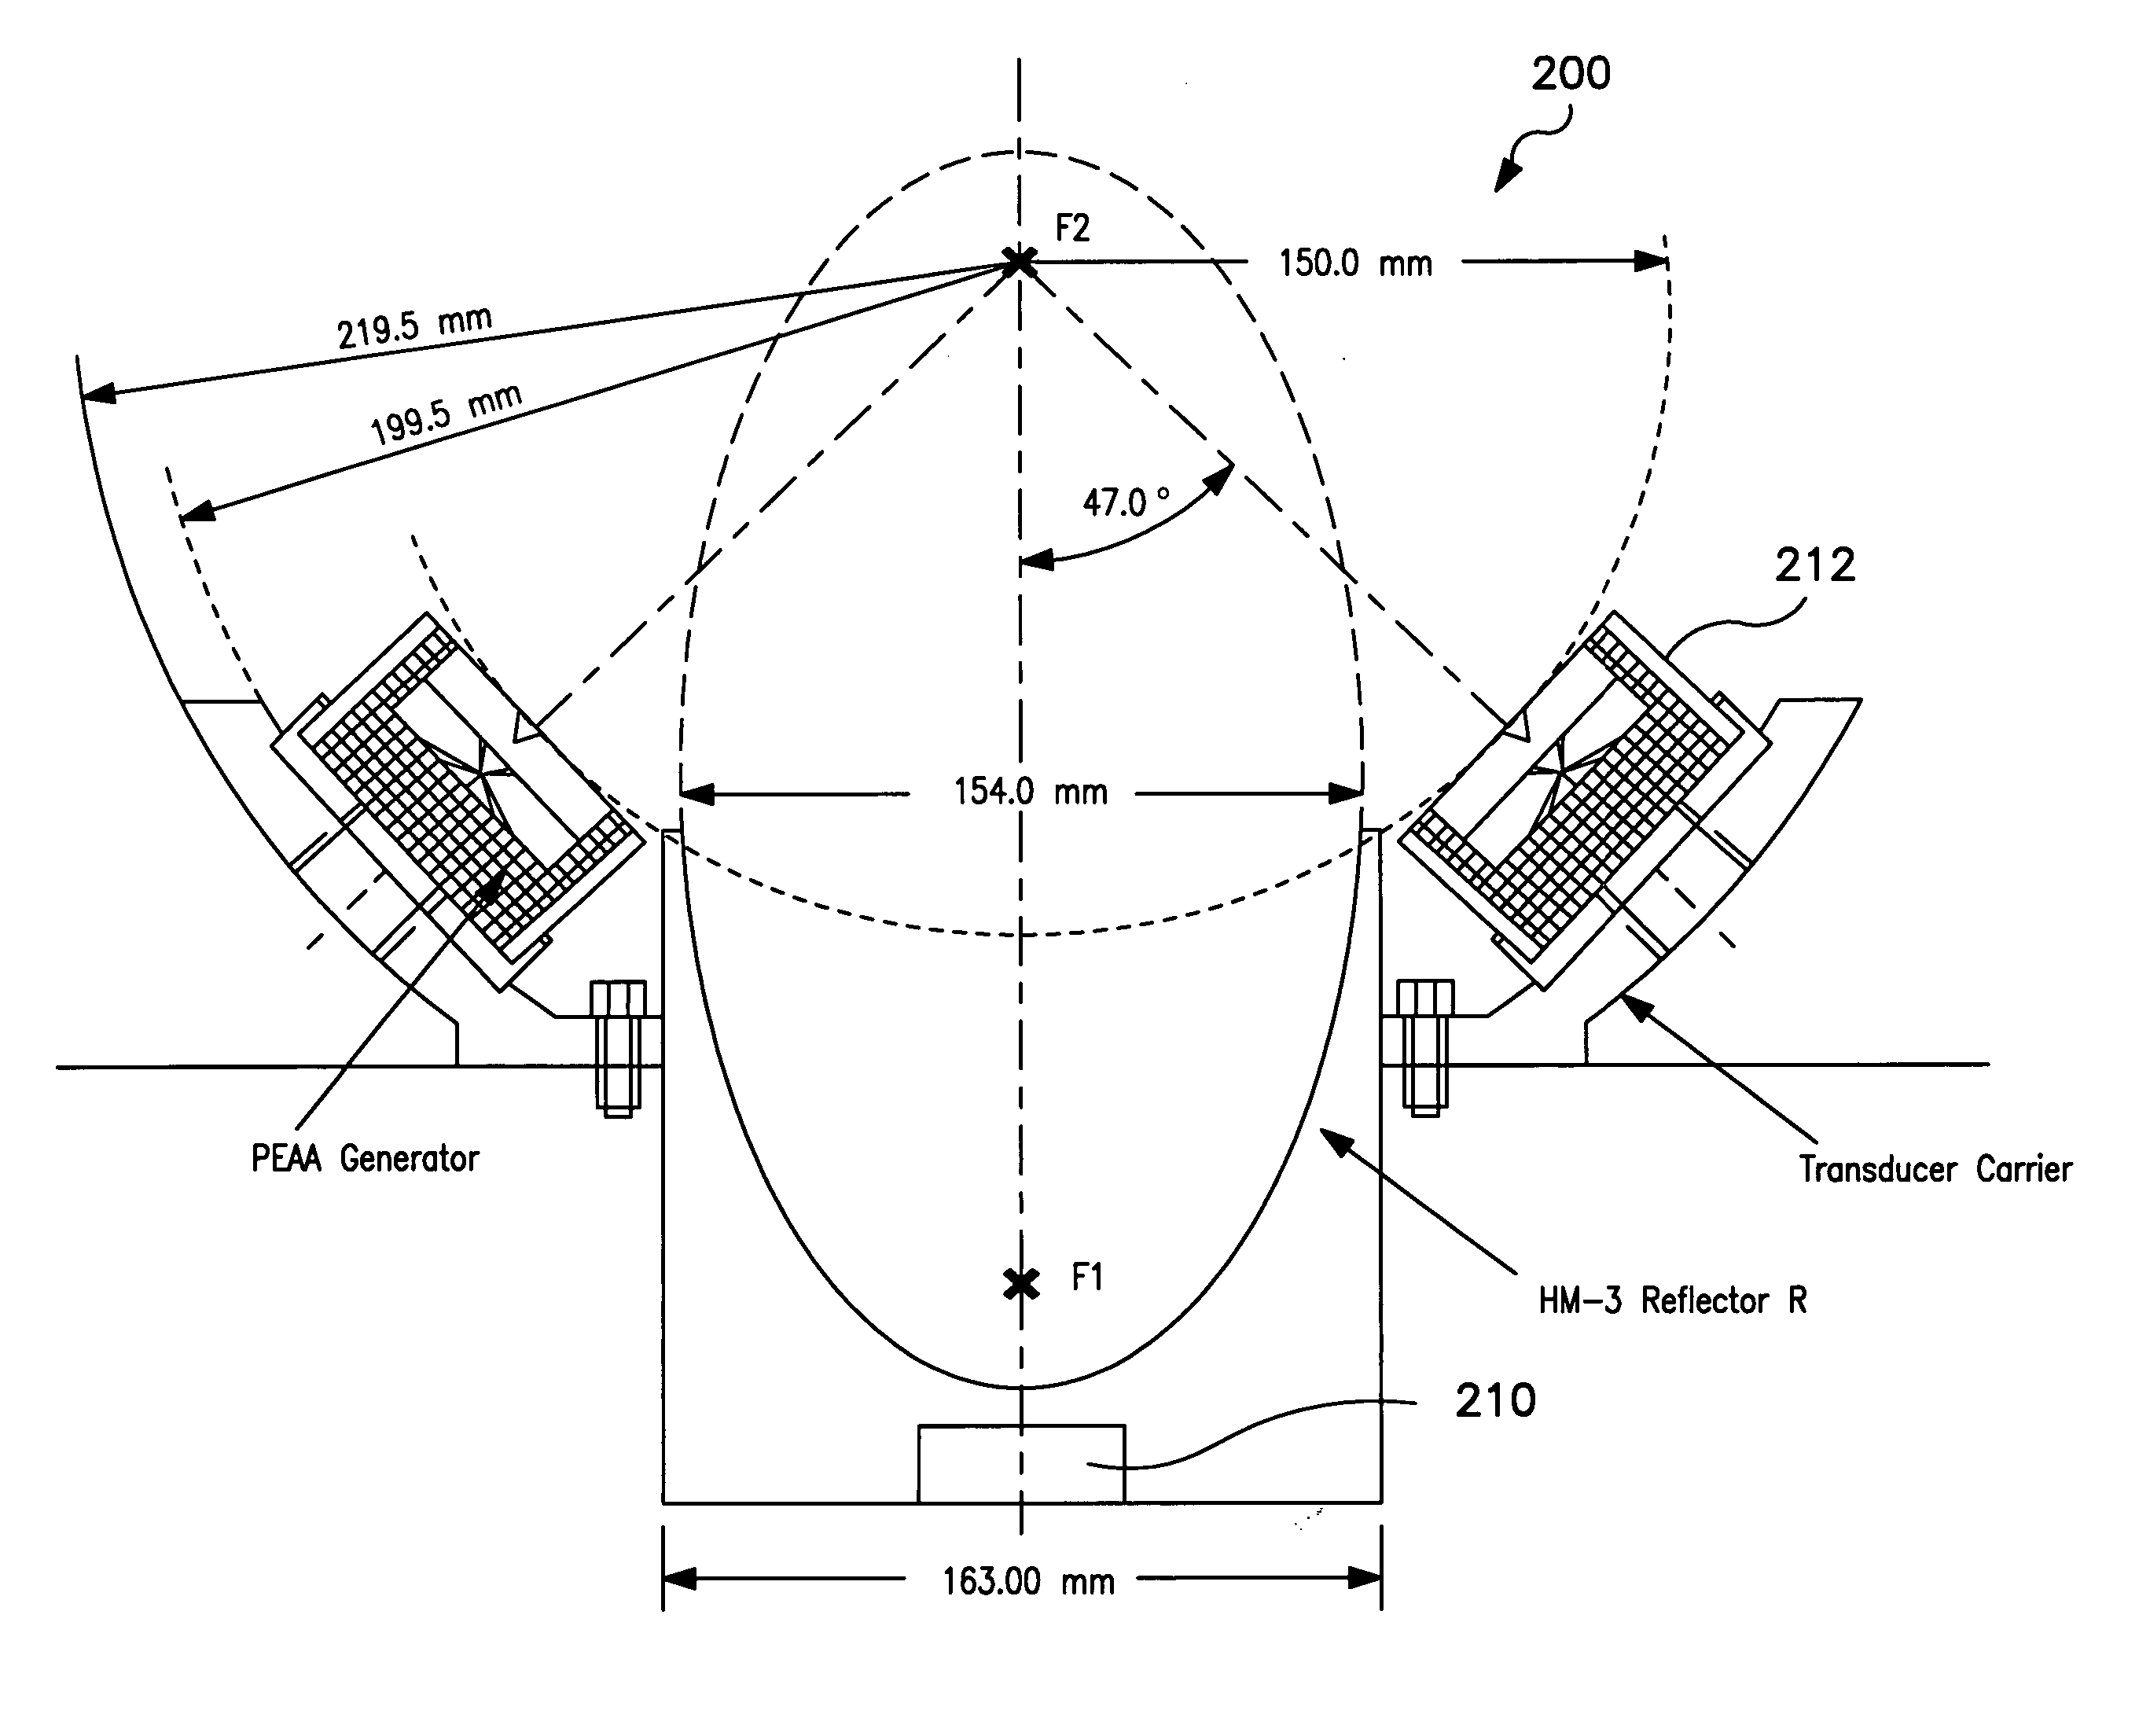 Apparatus for improved shock-wave lithotripsy (SWL) using a piezoelectric annular array (PEAA) shock-wave generator in combination with a primary shock wave source